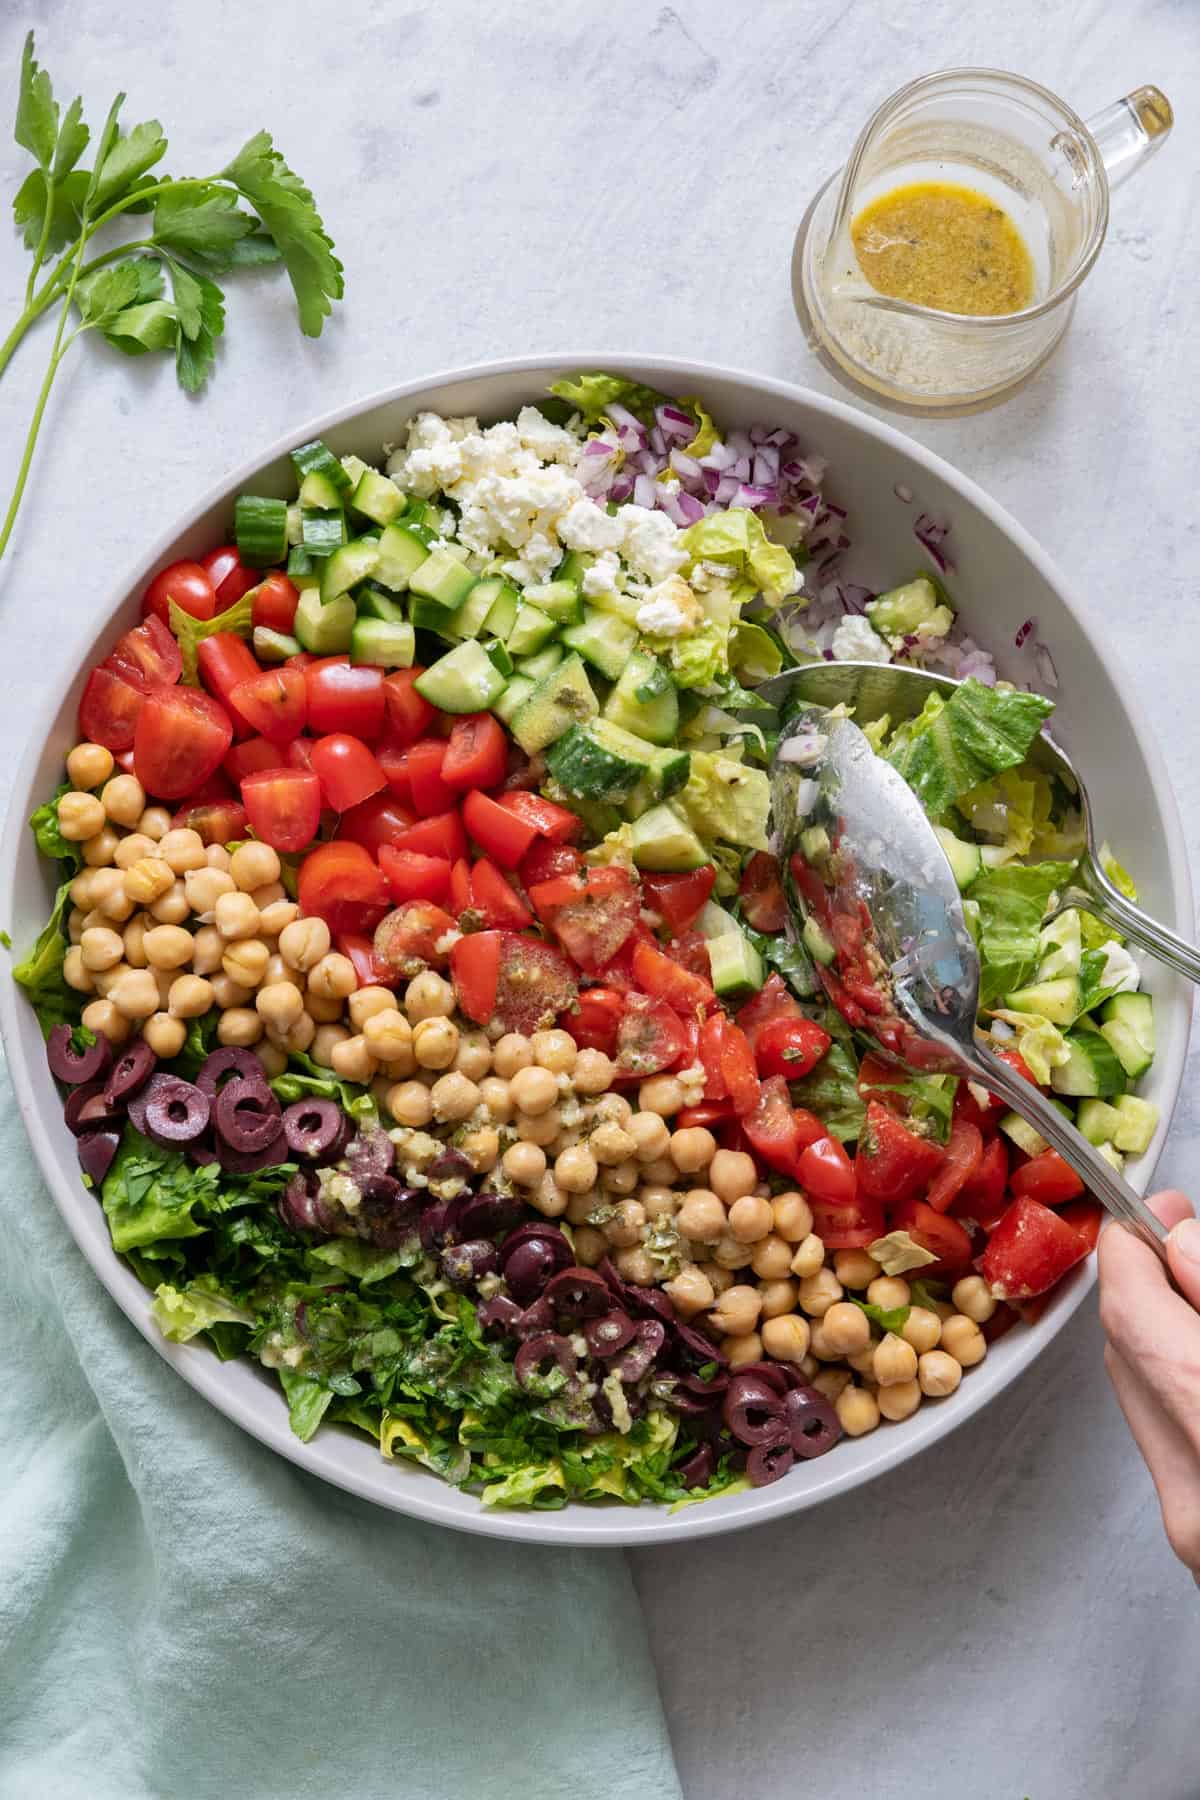 Two spoons scoop a serving of Mediterranean Chopped salad from a large serving dish.